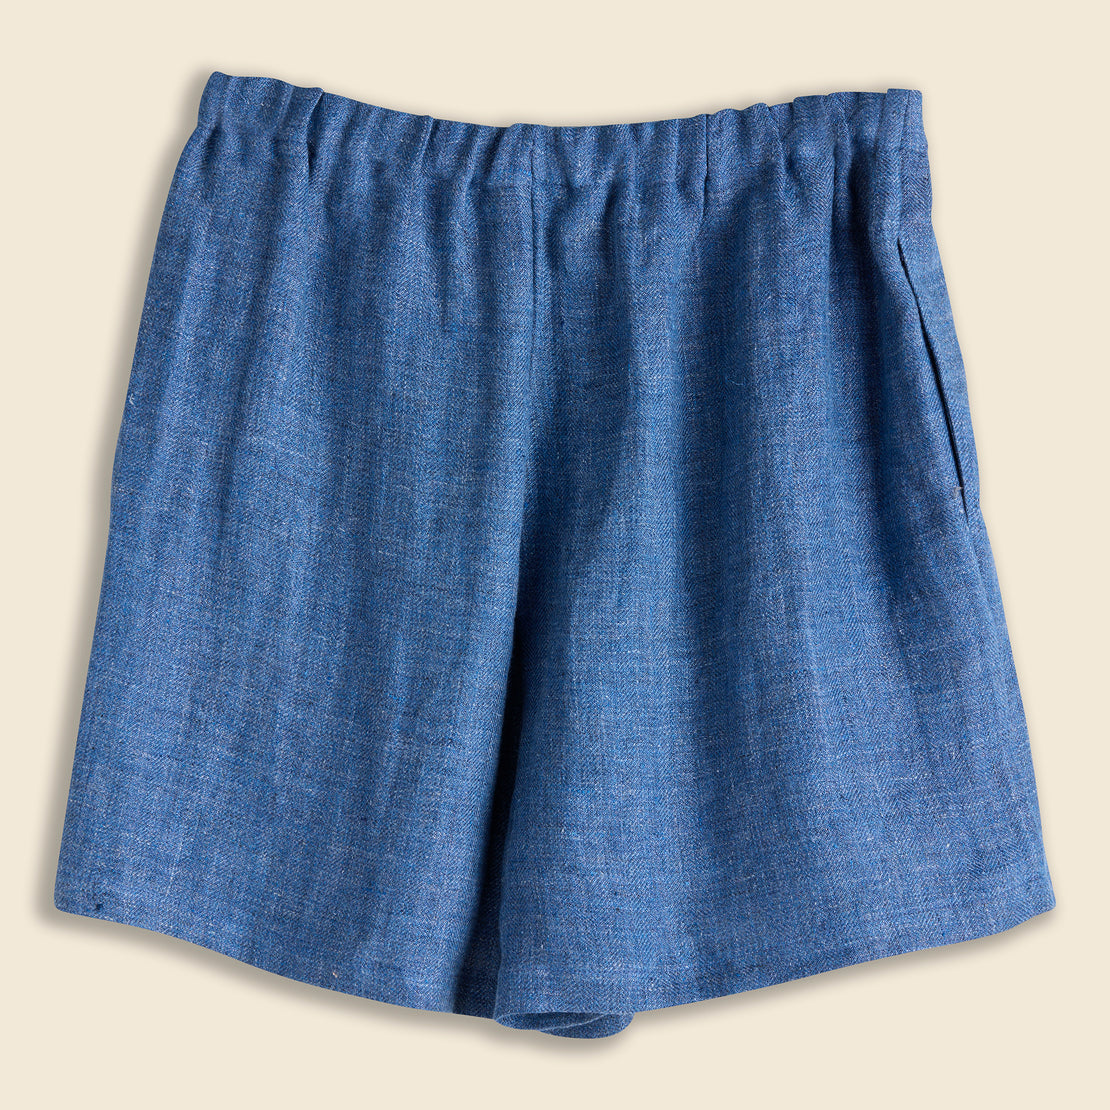 Pleated Short - Denim Blue - Amente - STAG Provisions - W - Shorts - Solid